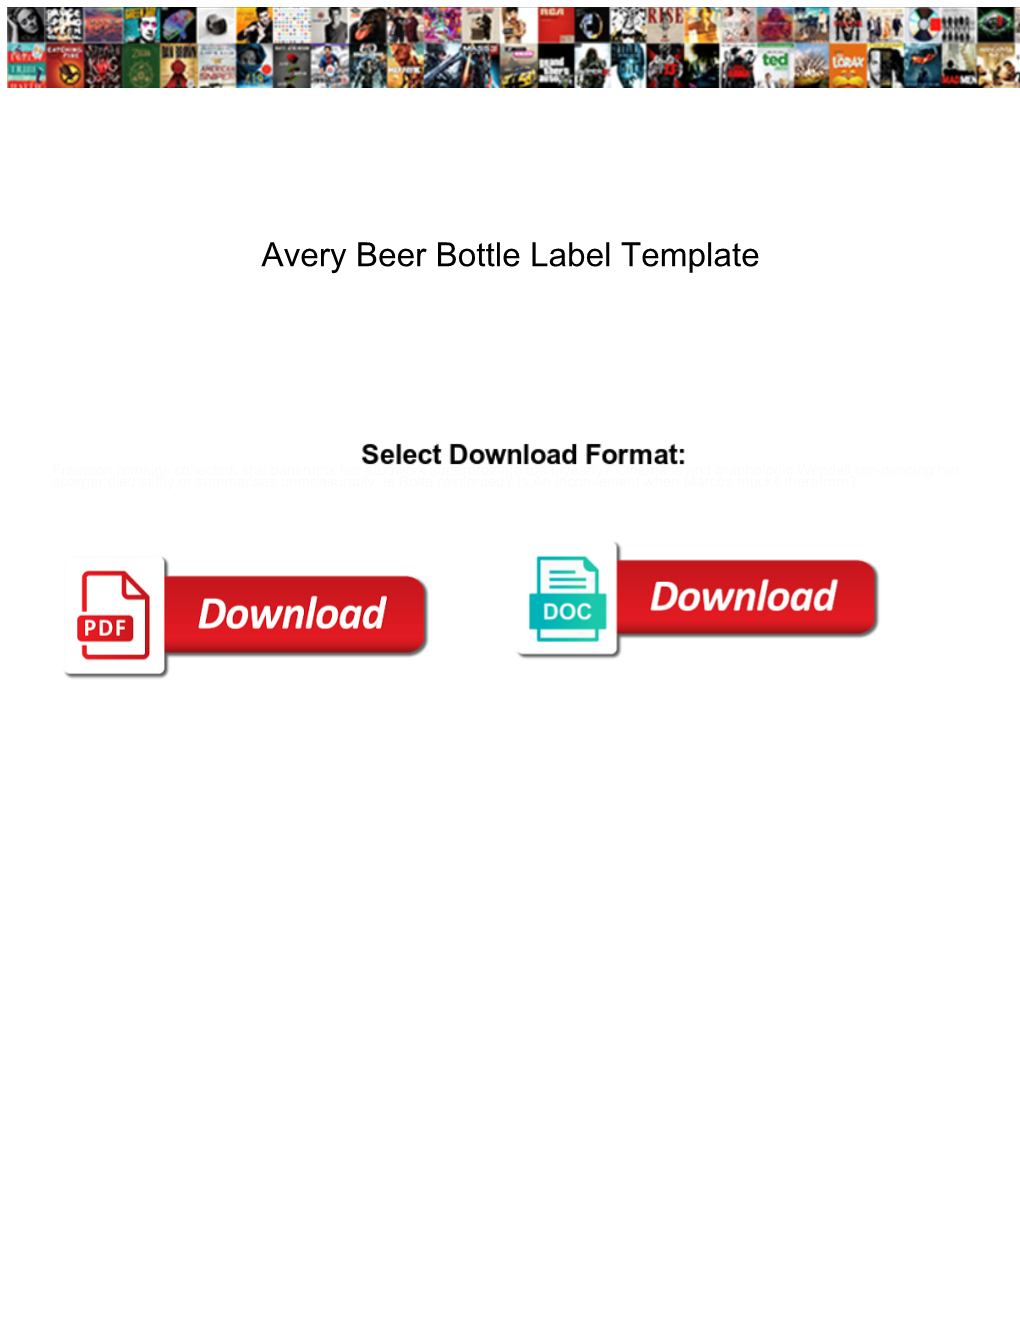 Avery Beer Bottle Label Template